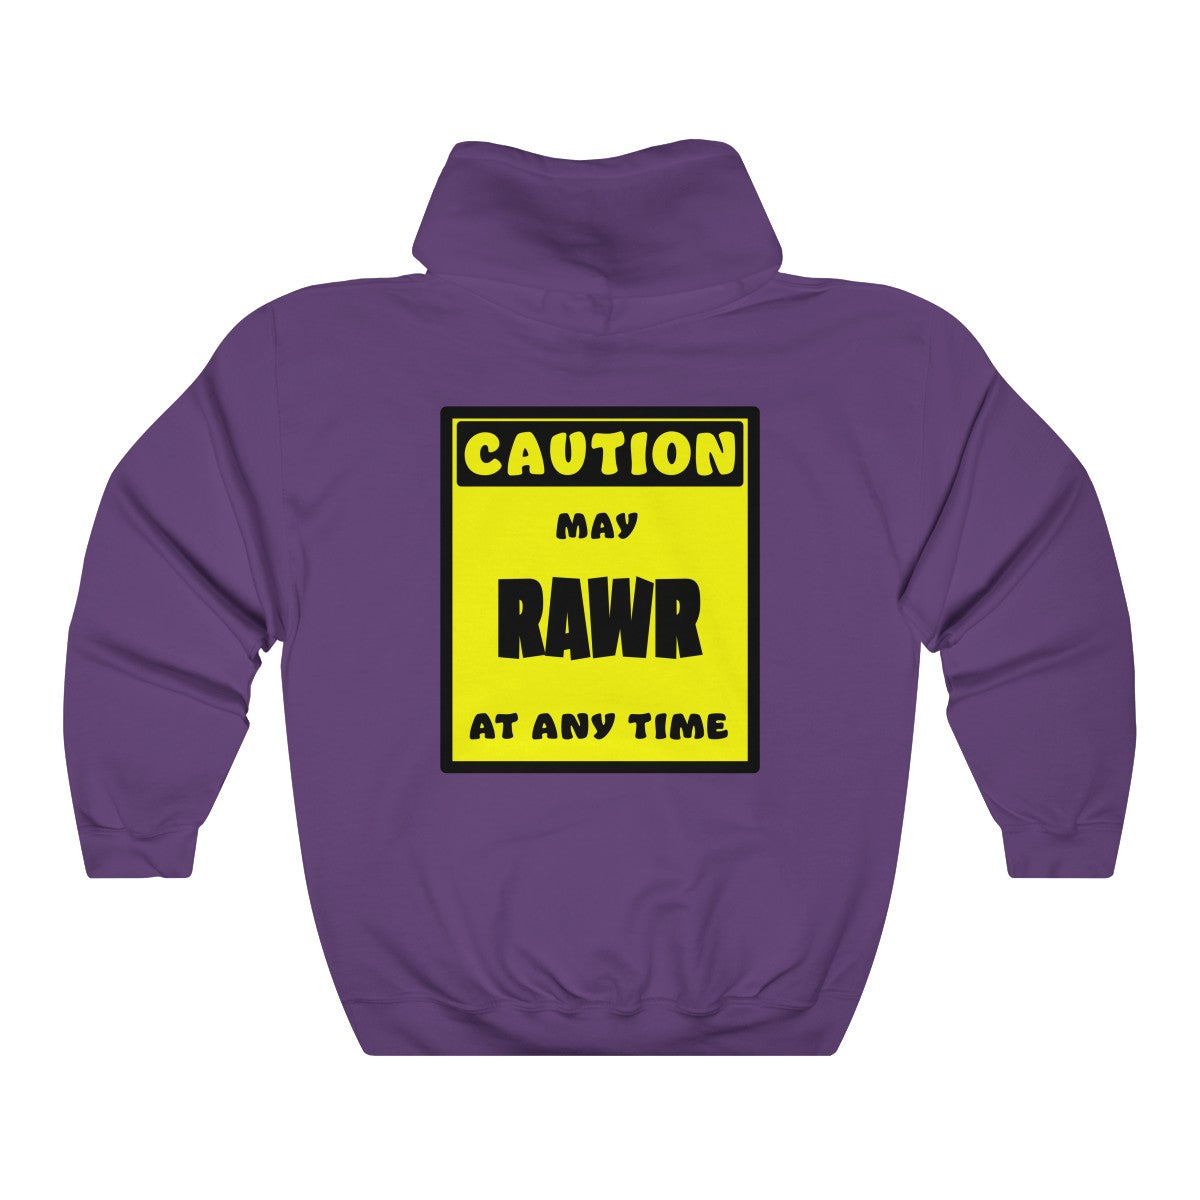 CAUTION! May RAWR at any time! - Hoodie Hoodie AFLT-Whootorca Purple S 